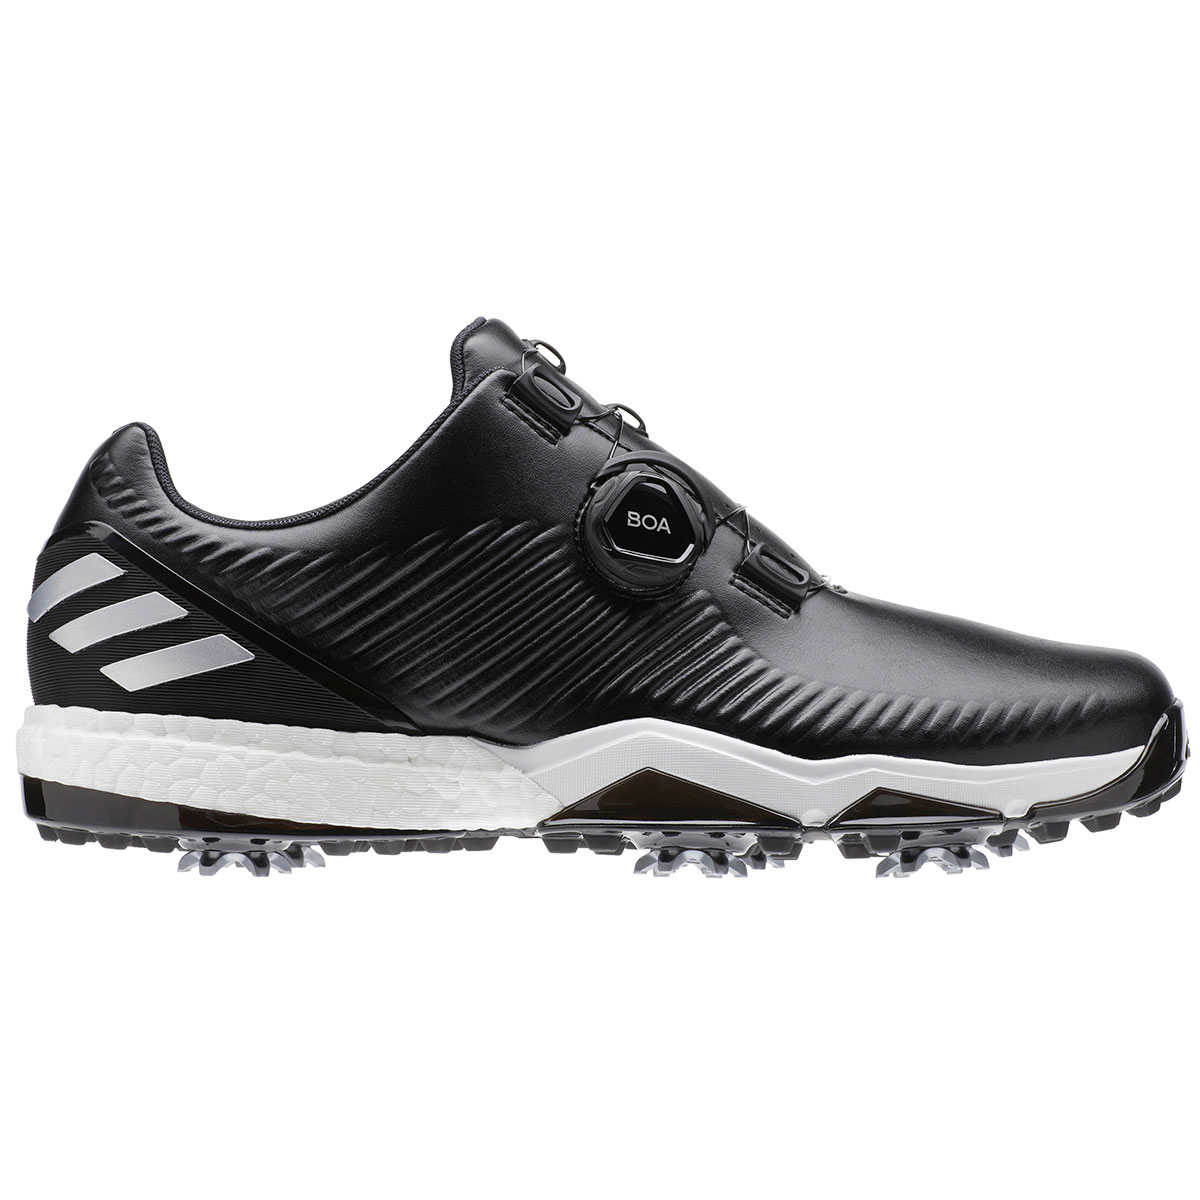 adidas forged golf shoes